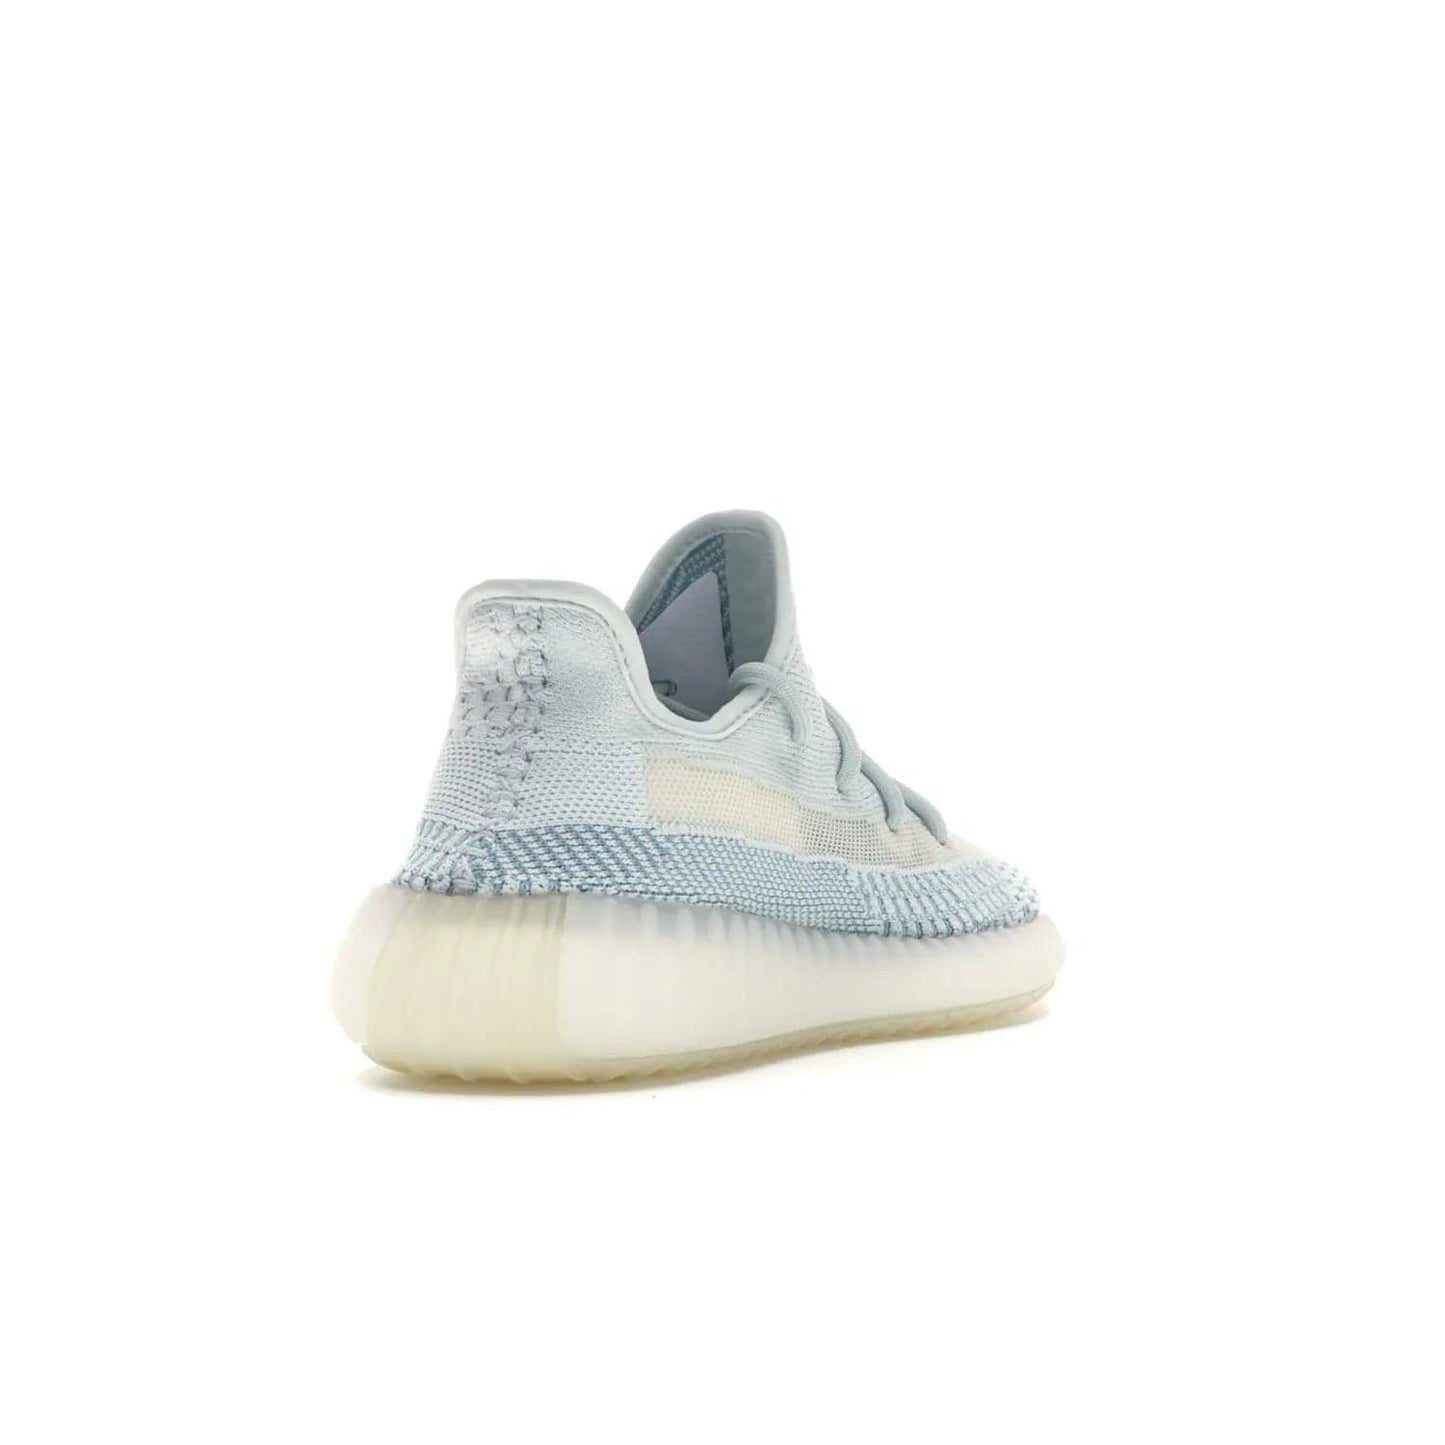 adidas Yeezy Boost 350 V2 Cloud White (Non-Reflective) - Image 31 - Only at www.BallersClubKickz.com - Adidas Yeezy Boost 350 V2 Cloud White (Non-Reflective) features Primeknit fabric and a unique, eye-catching design of cream, bluish-white, and transparent strip. Step out in timeless style with this eye-catching sneaker.